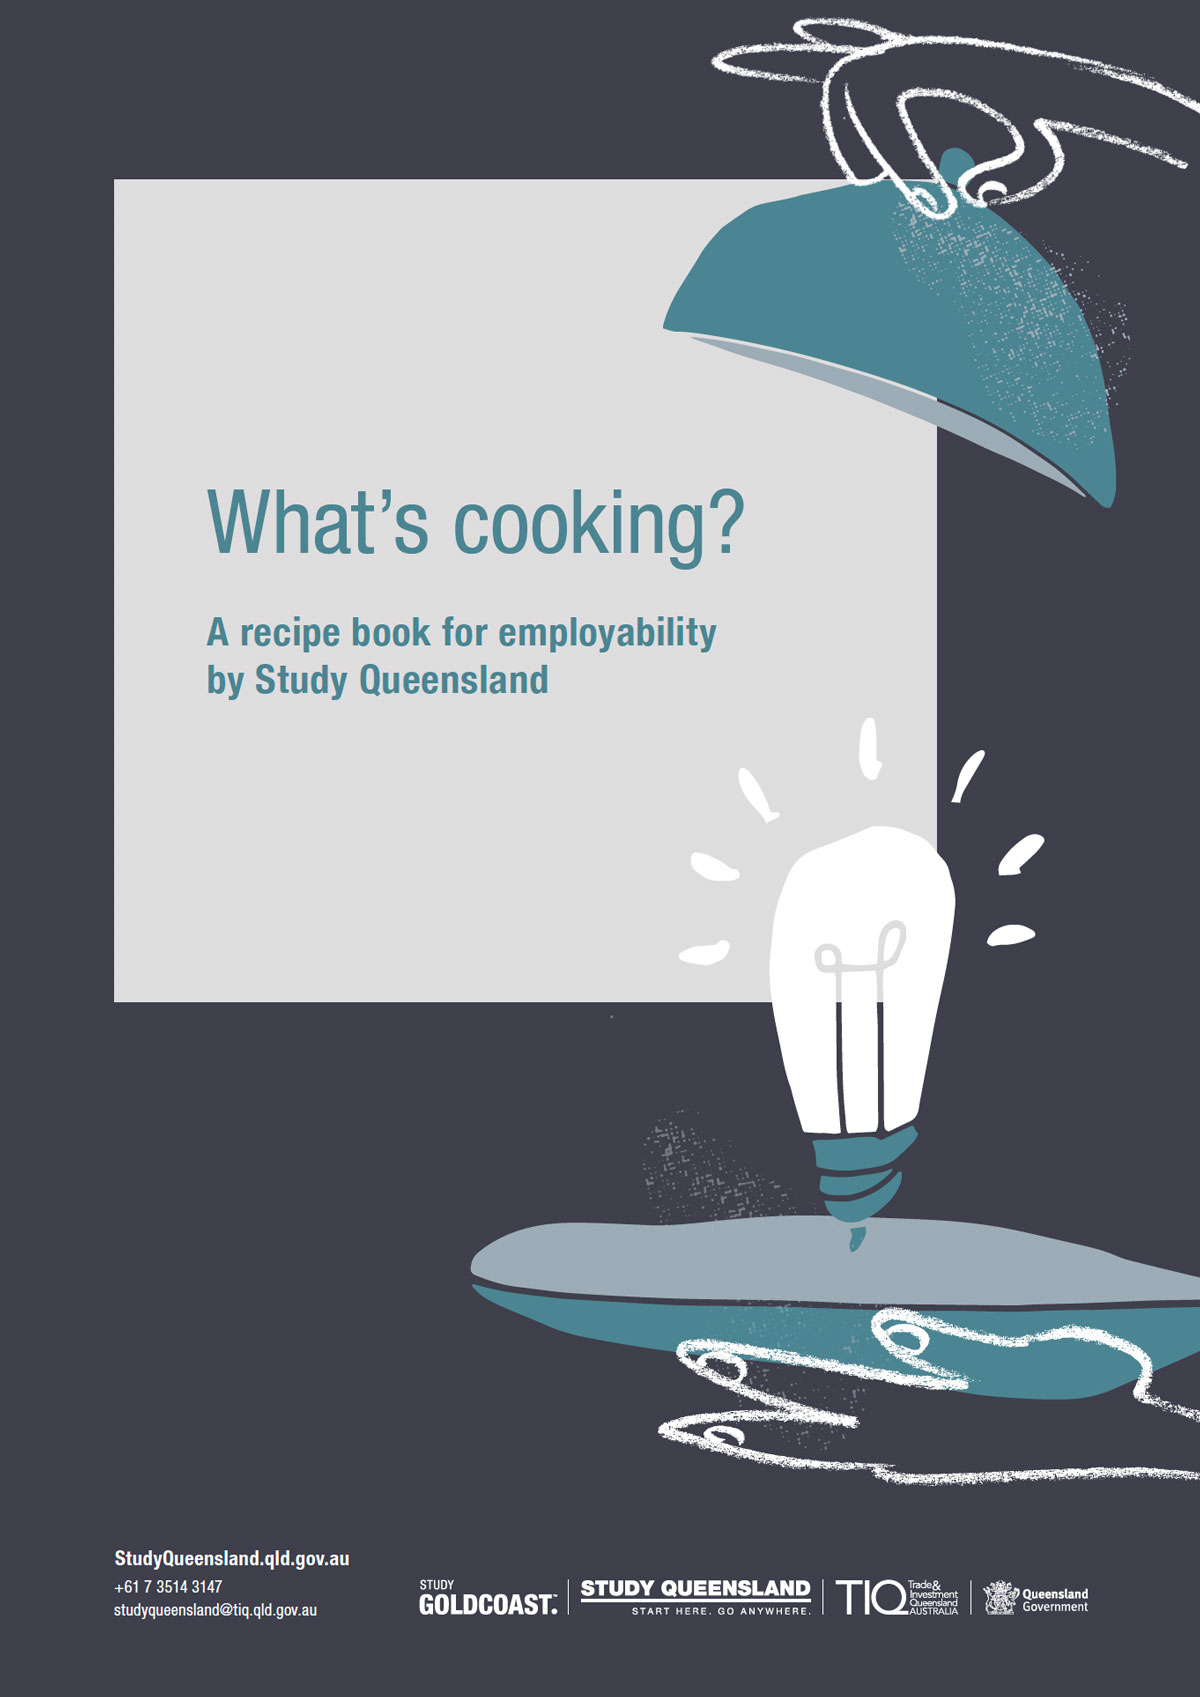 ‘What’s Cooking?’| Cookbook for employability